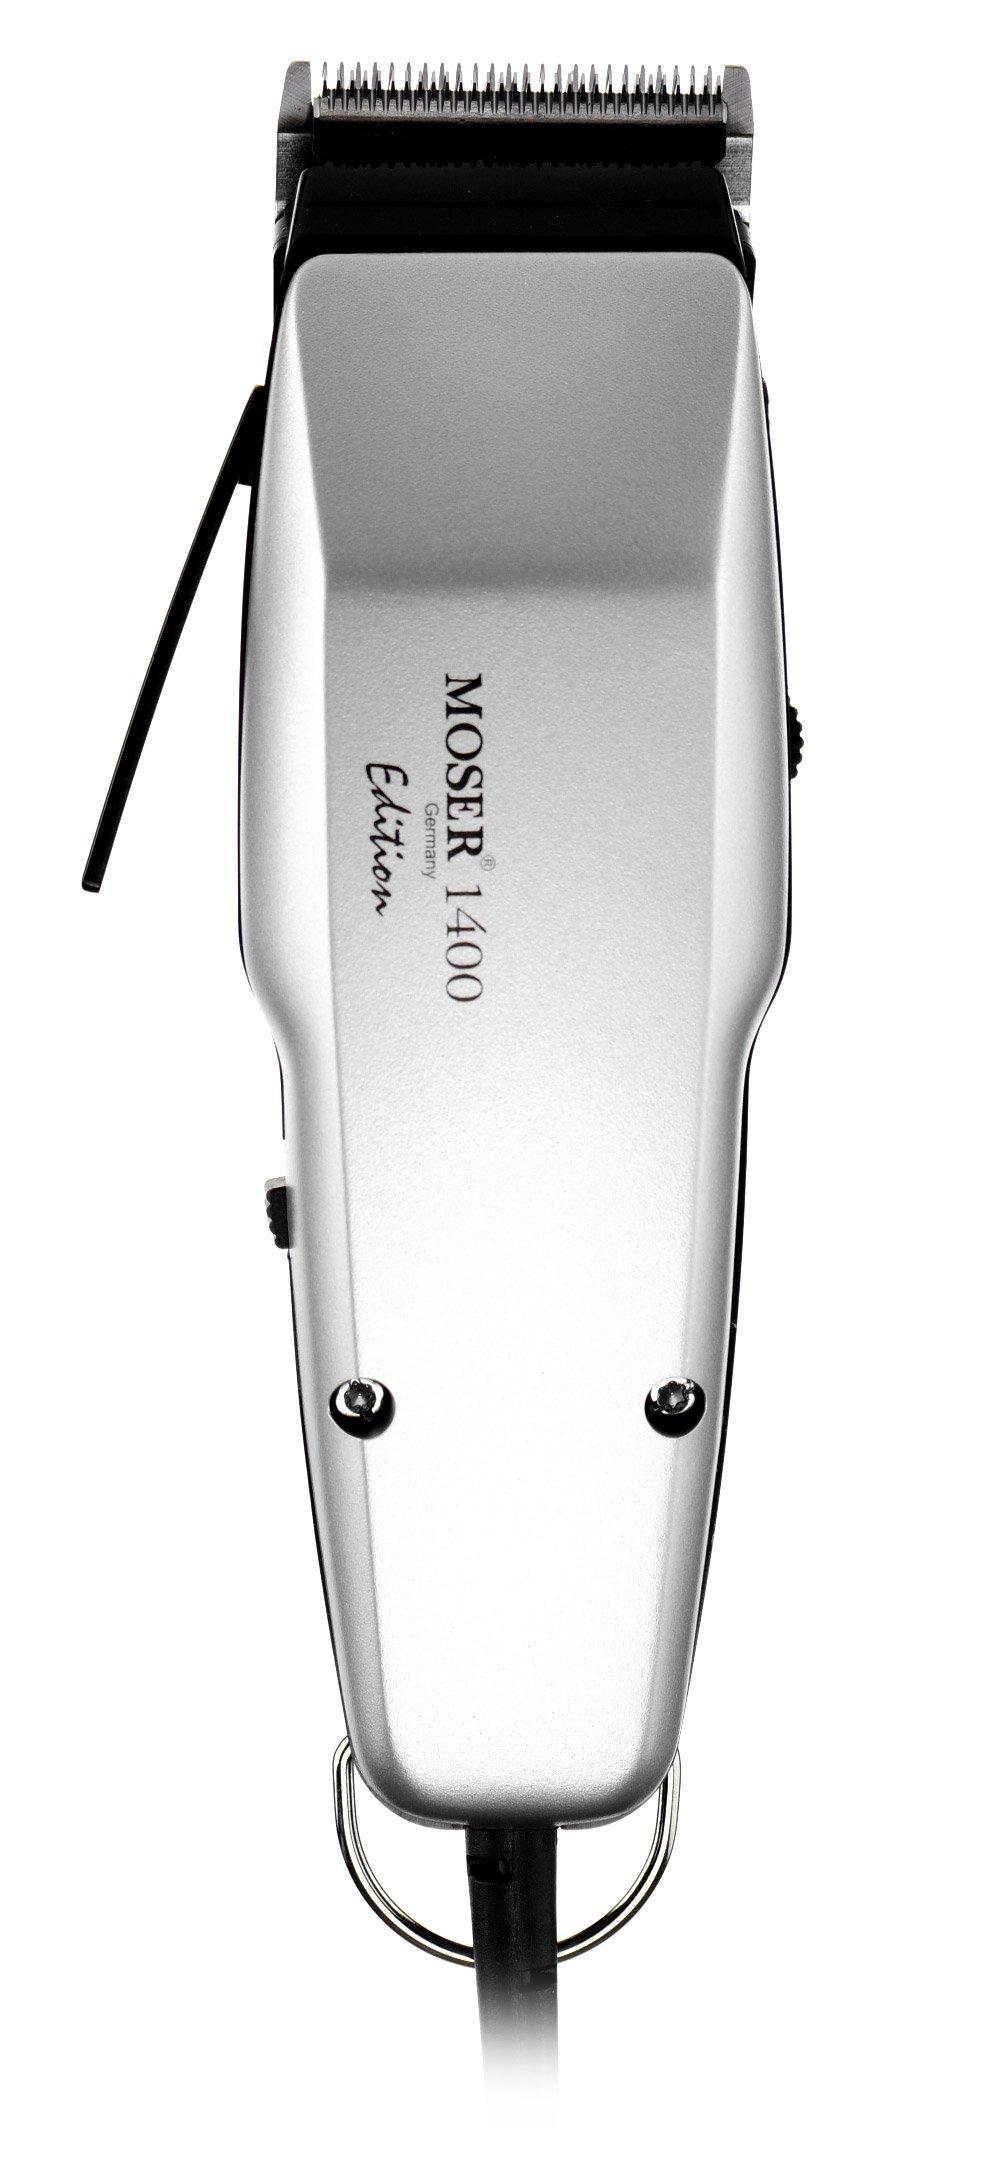 MOSER 1400 White - Professional Corded Hair Clipper